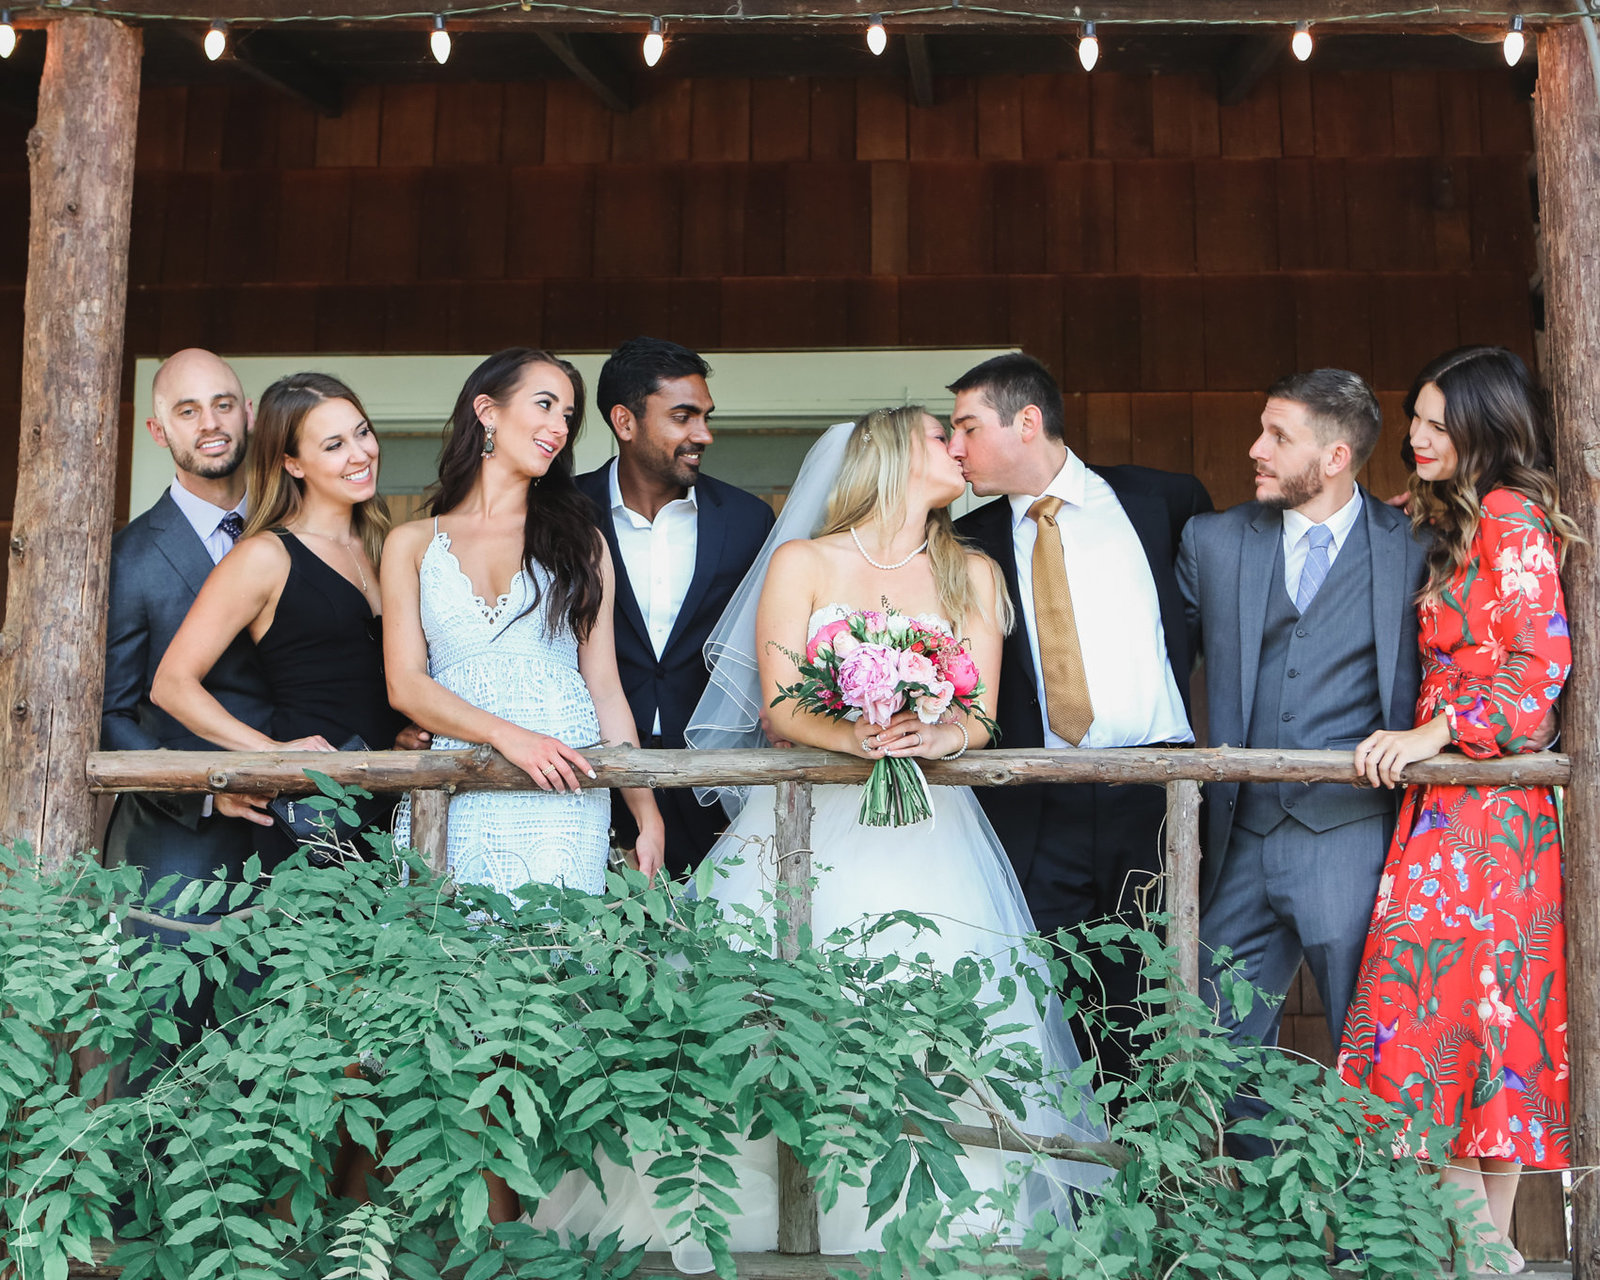 In beautiful rustic los altos wedding, the bride and groom pose with their familt